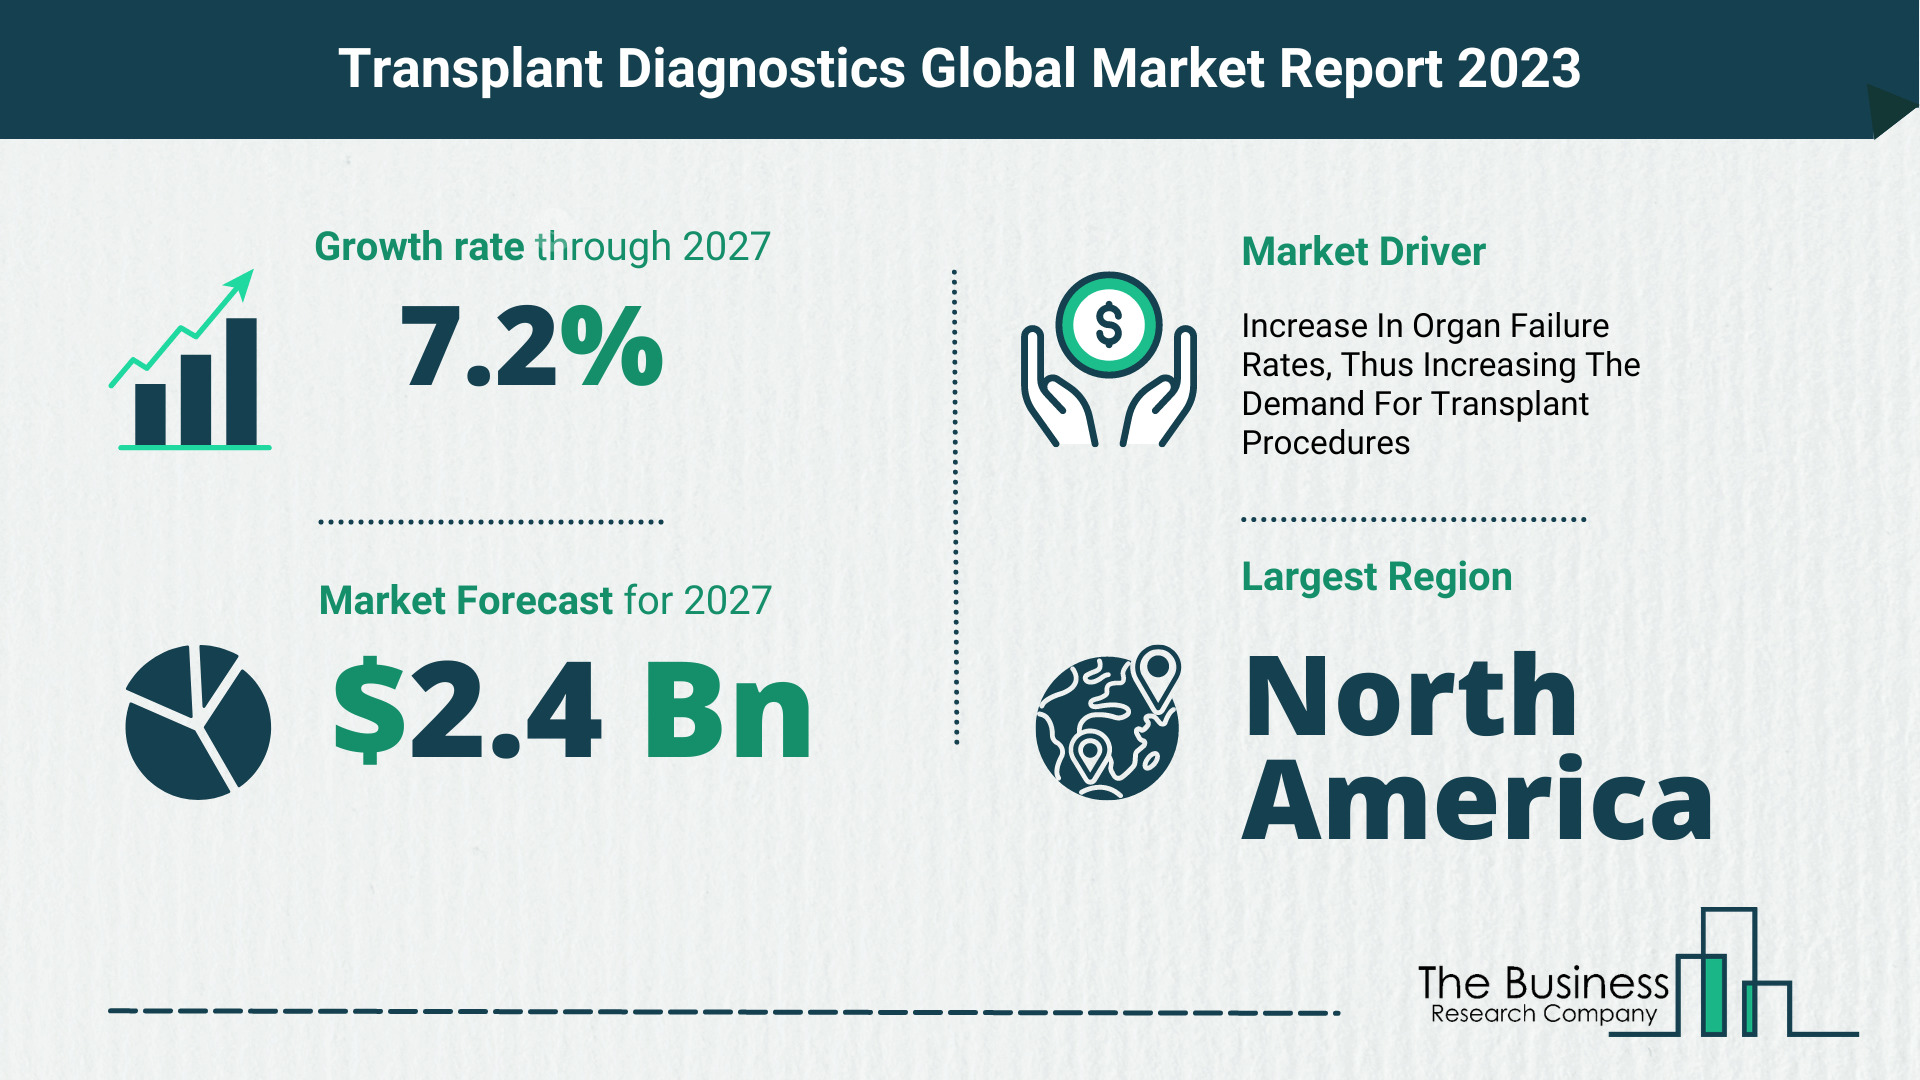 Global Transplant Diagnostics Market Opportunities And Strategies 2023